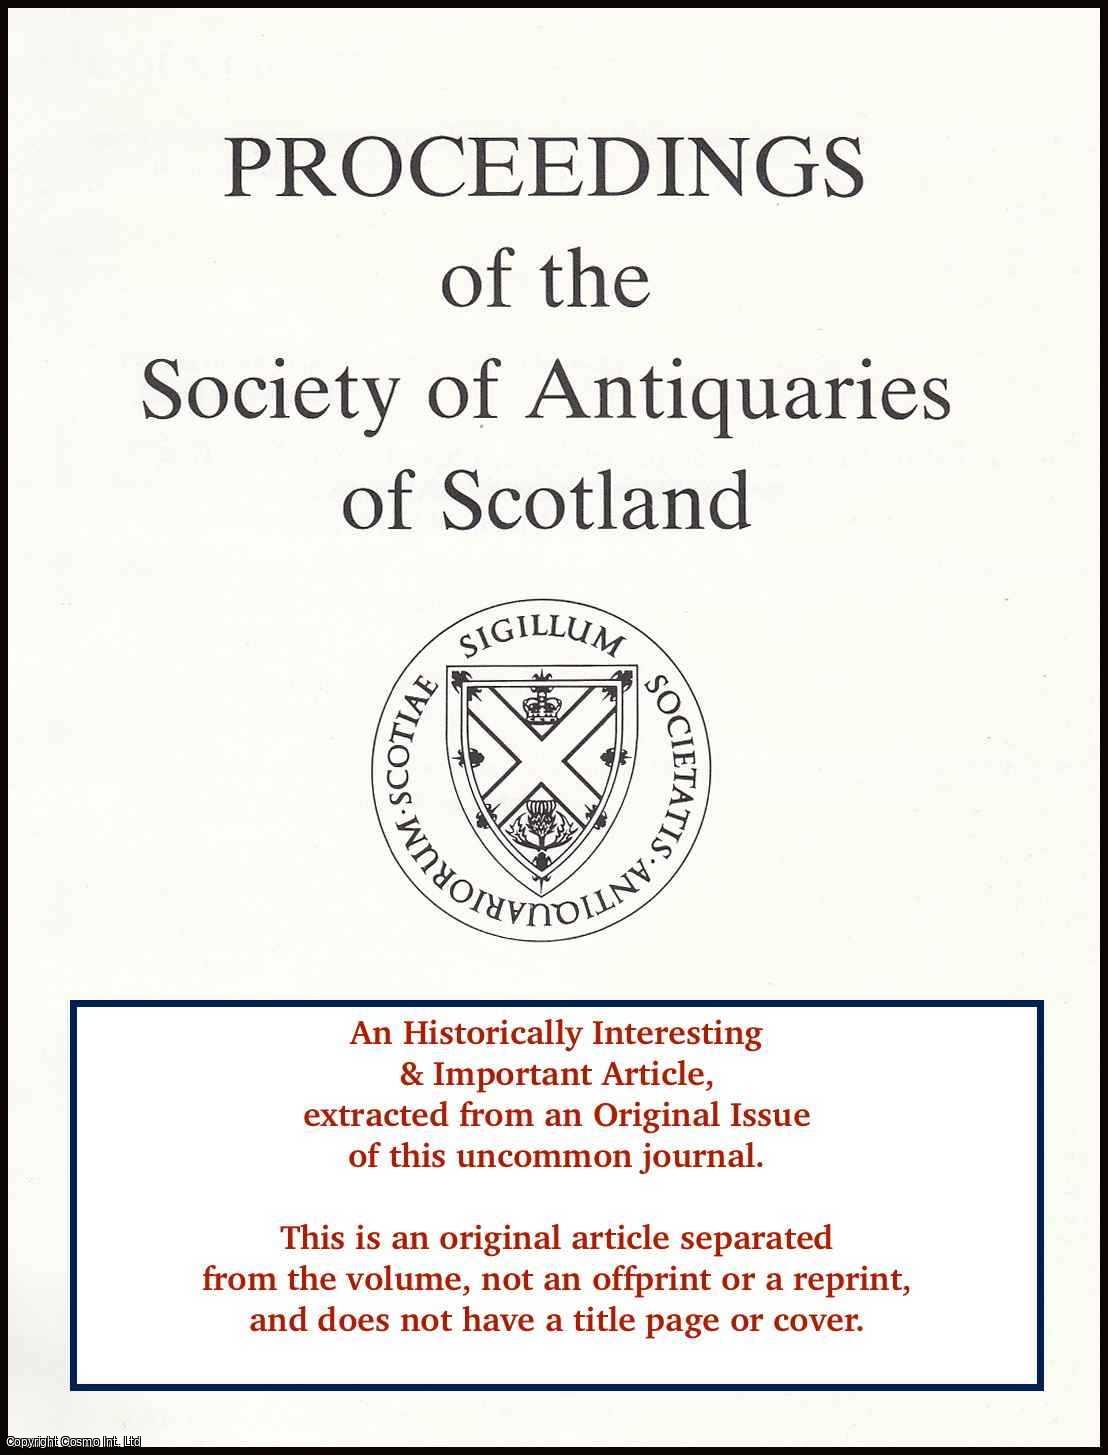 Alexander Hutcheson - The Discovery of a Stratum Containing Worked Flints at Broughty-Ferry. An original article from the Proceedings of the Society of Antiquaries of Scotland, 1885-86.